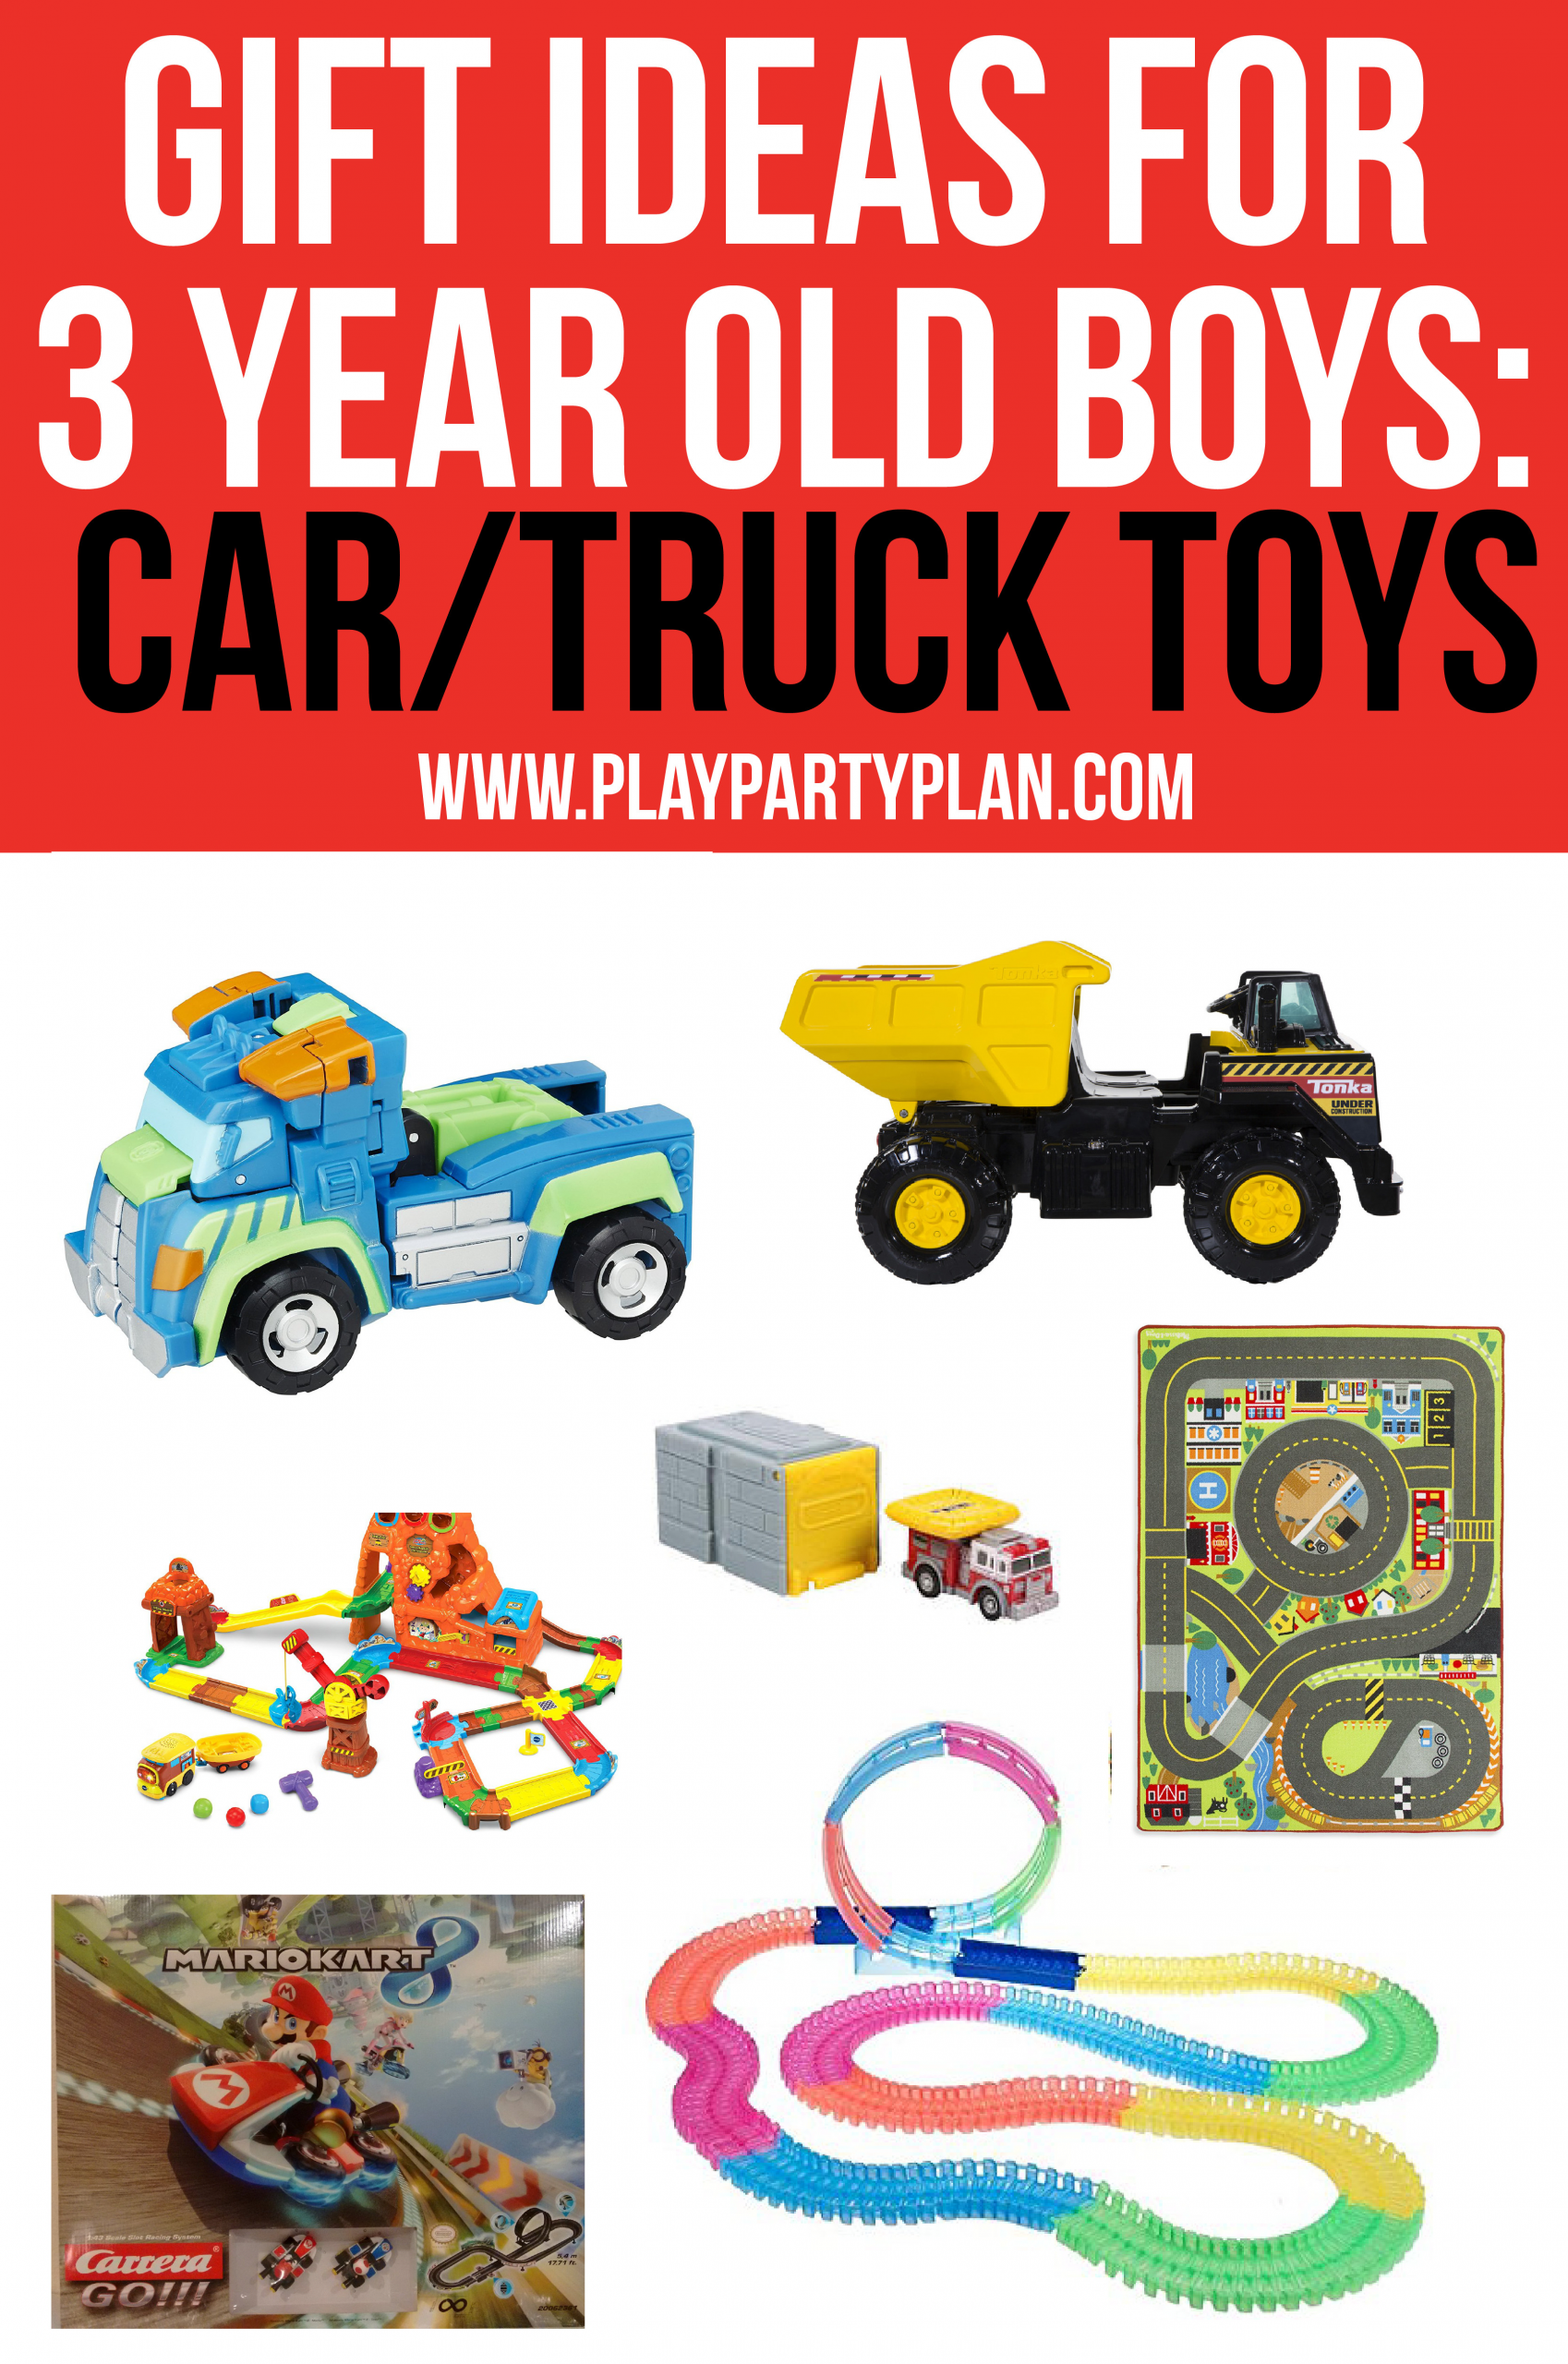 3 Year Old Gift Ideas Boys
 The ultimate list of t ideas for a 3 year old boy